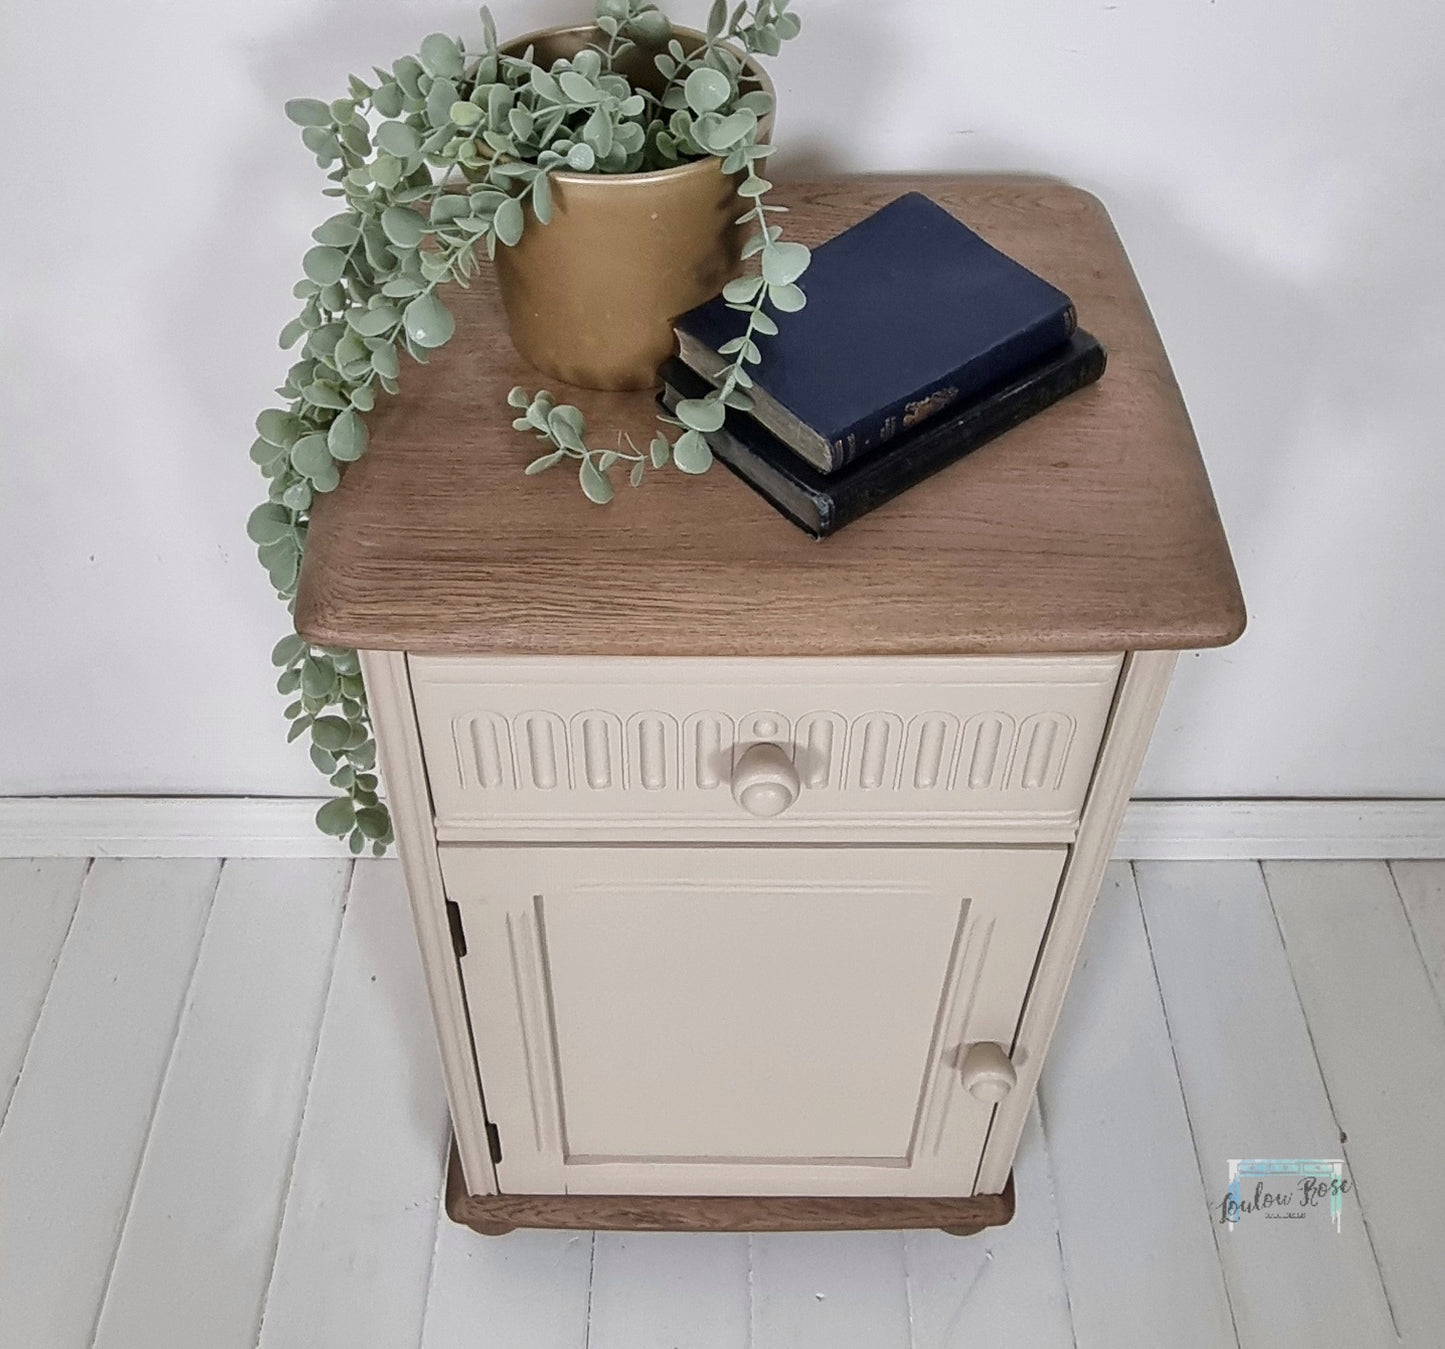 Priory Bedside Cabinet Painted in Beige with Green Interior